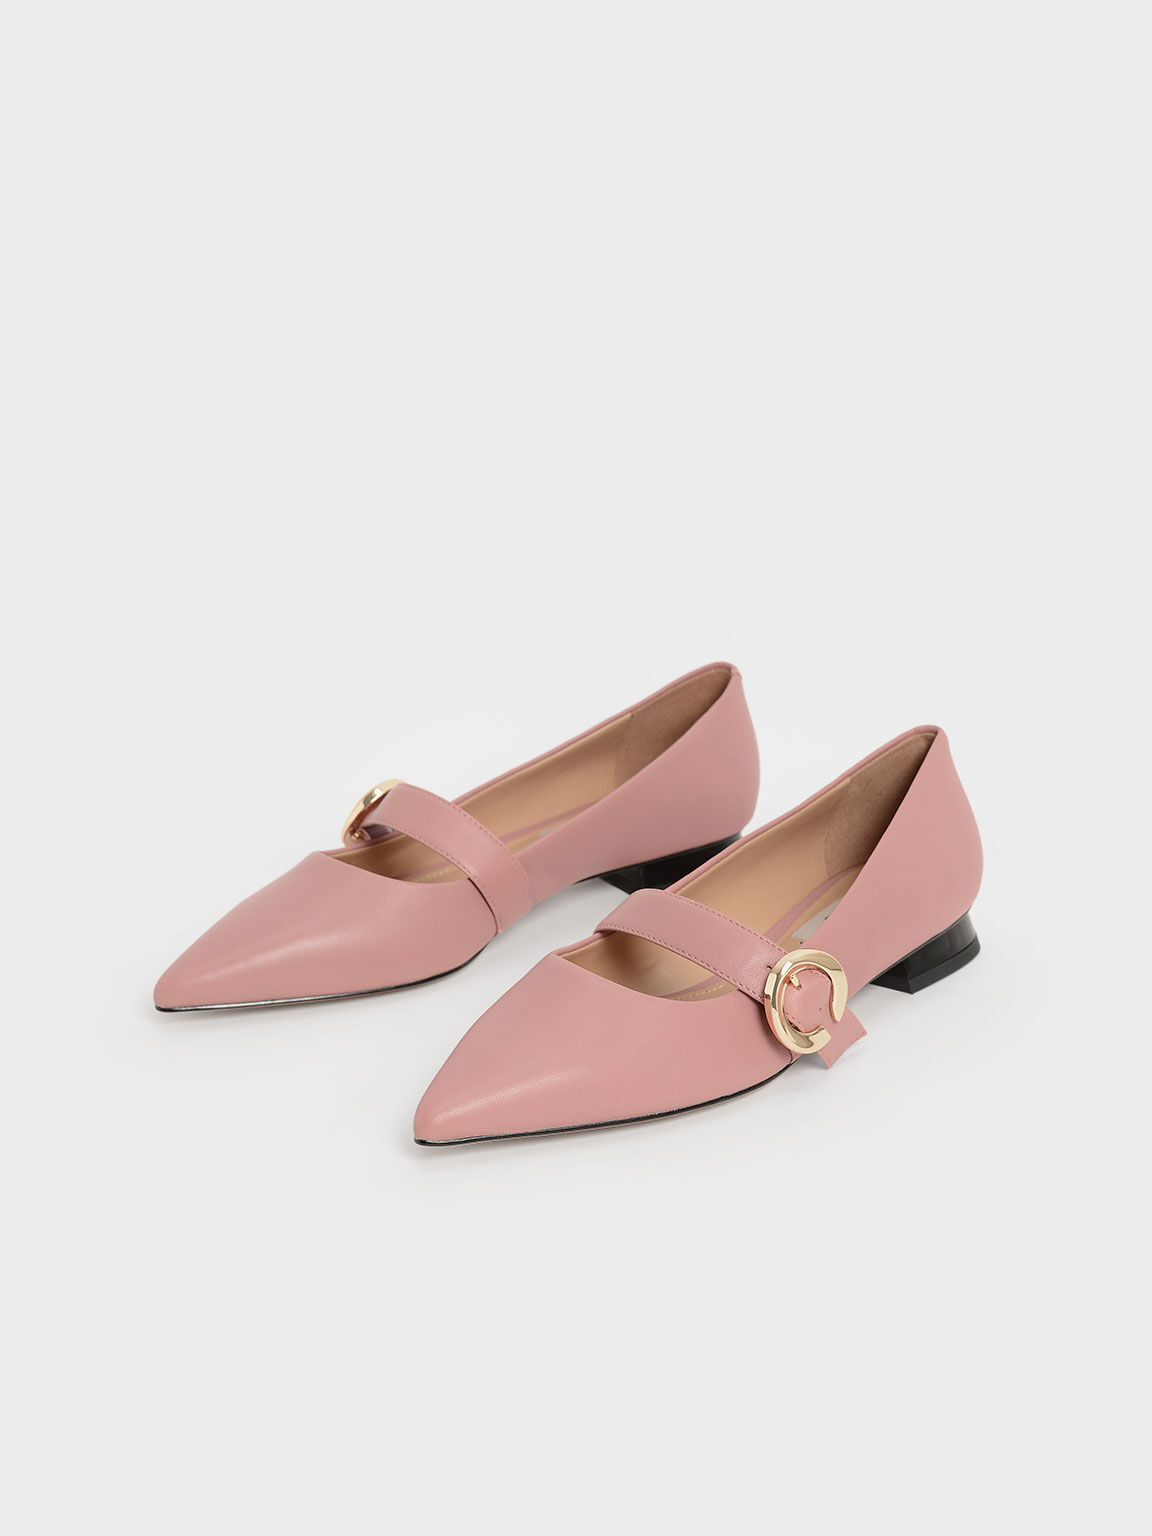 Metallic Buckle Leather Mary Janes, Pink, hi-res